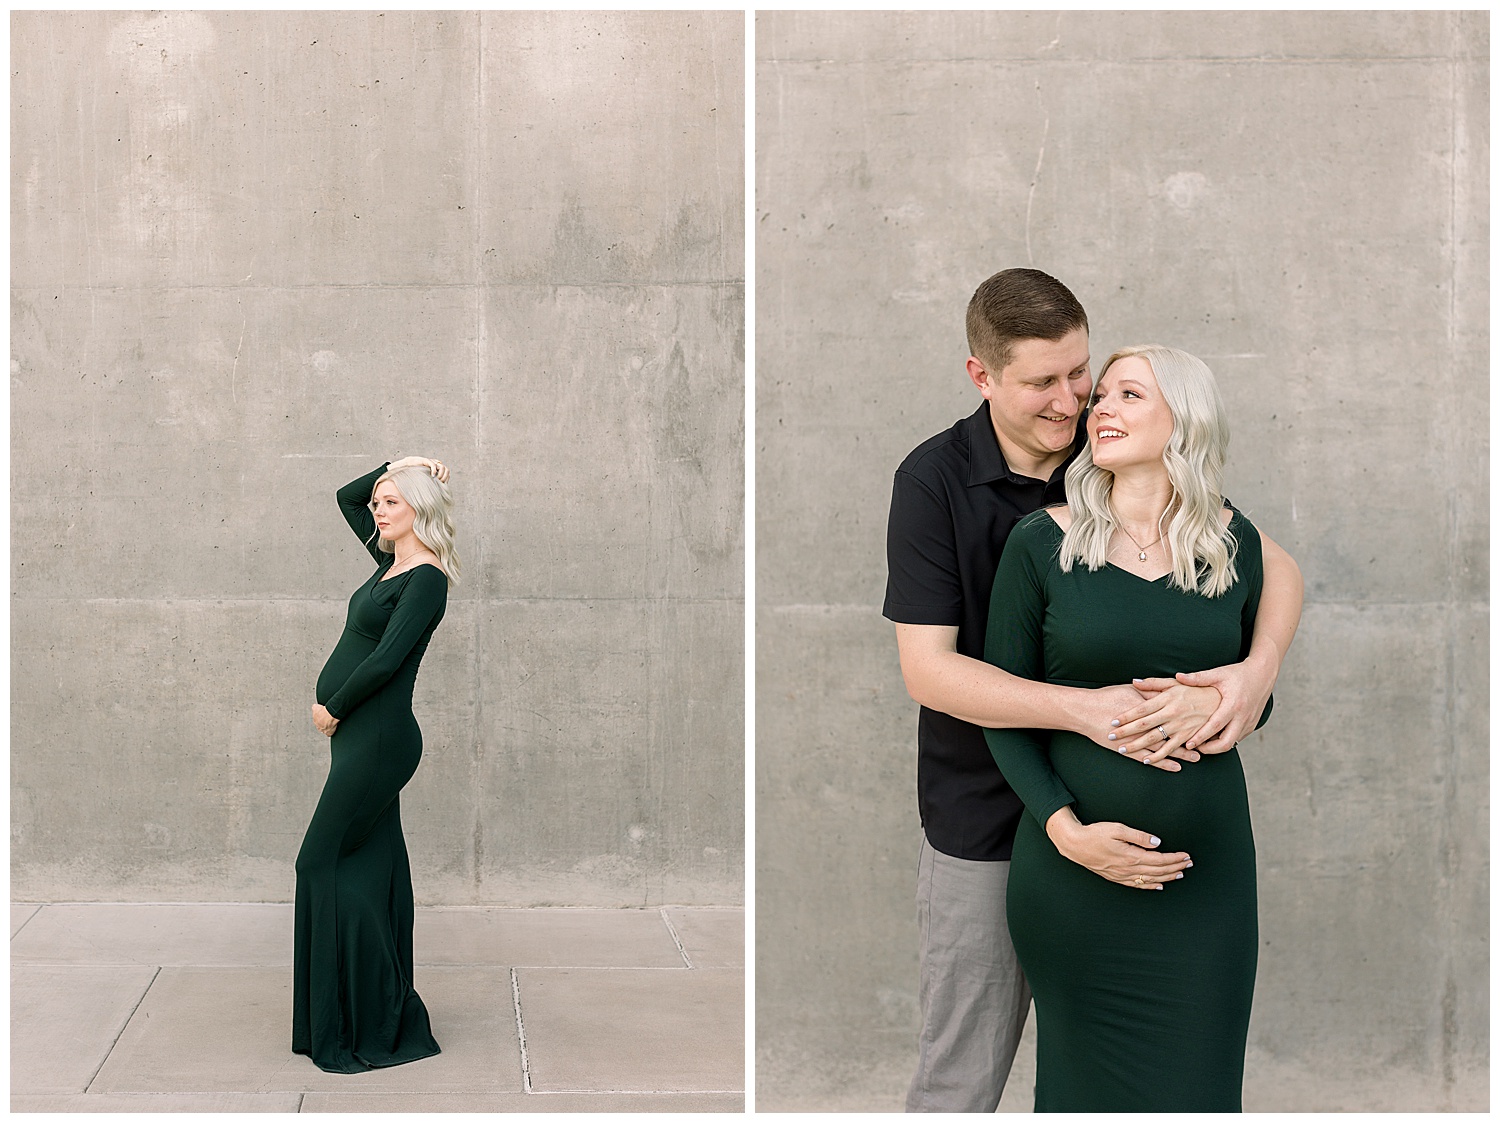 Maternity Session with a downtown modern feel, Phoenix Arizona